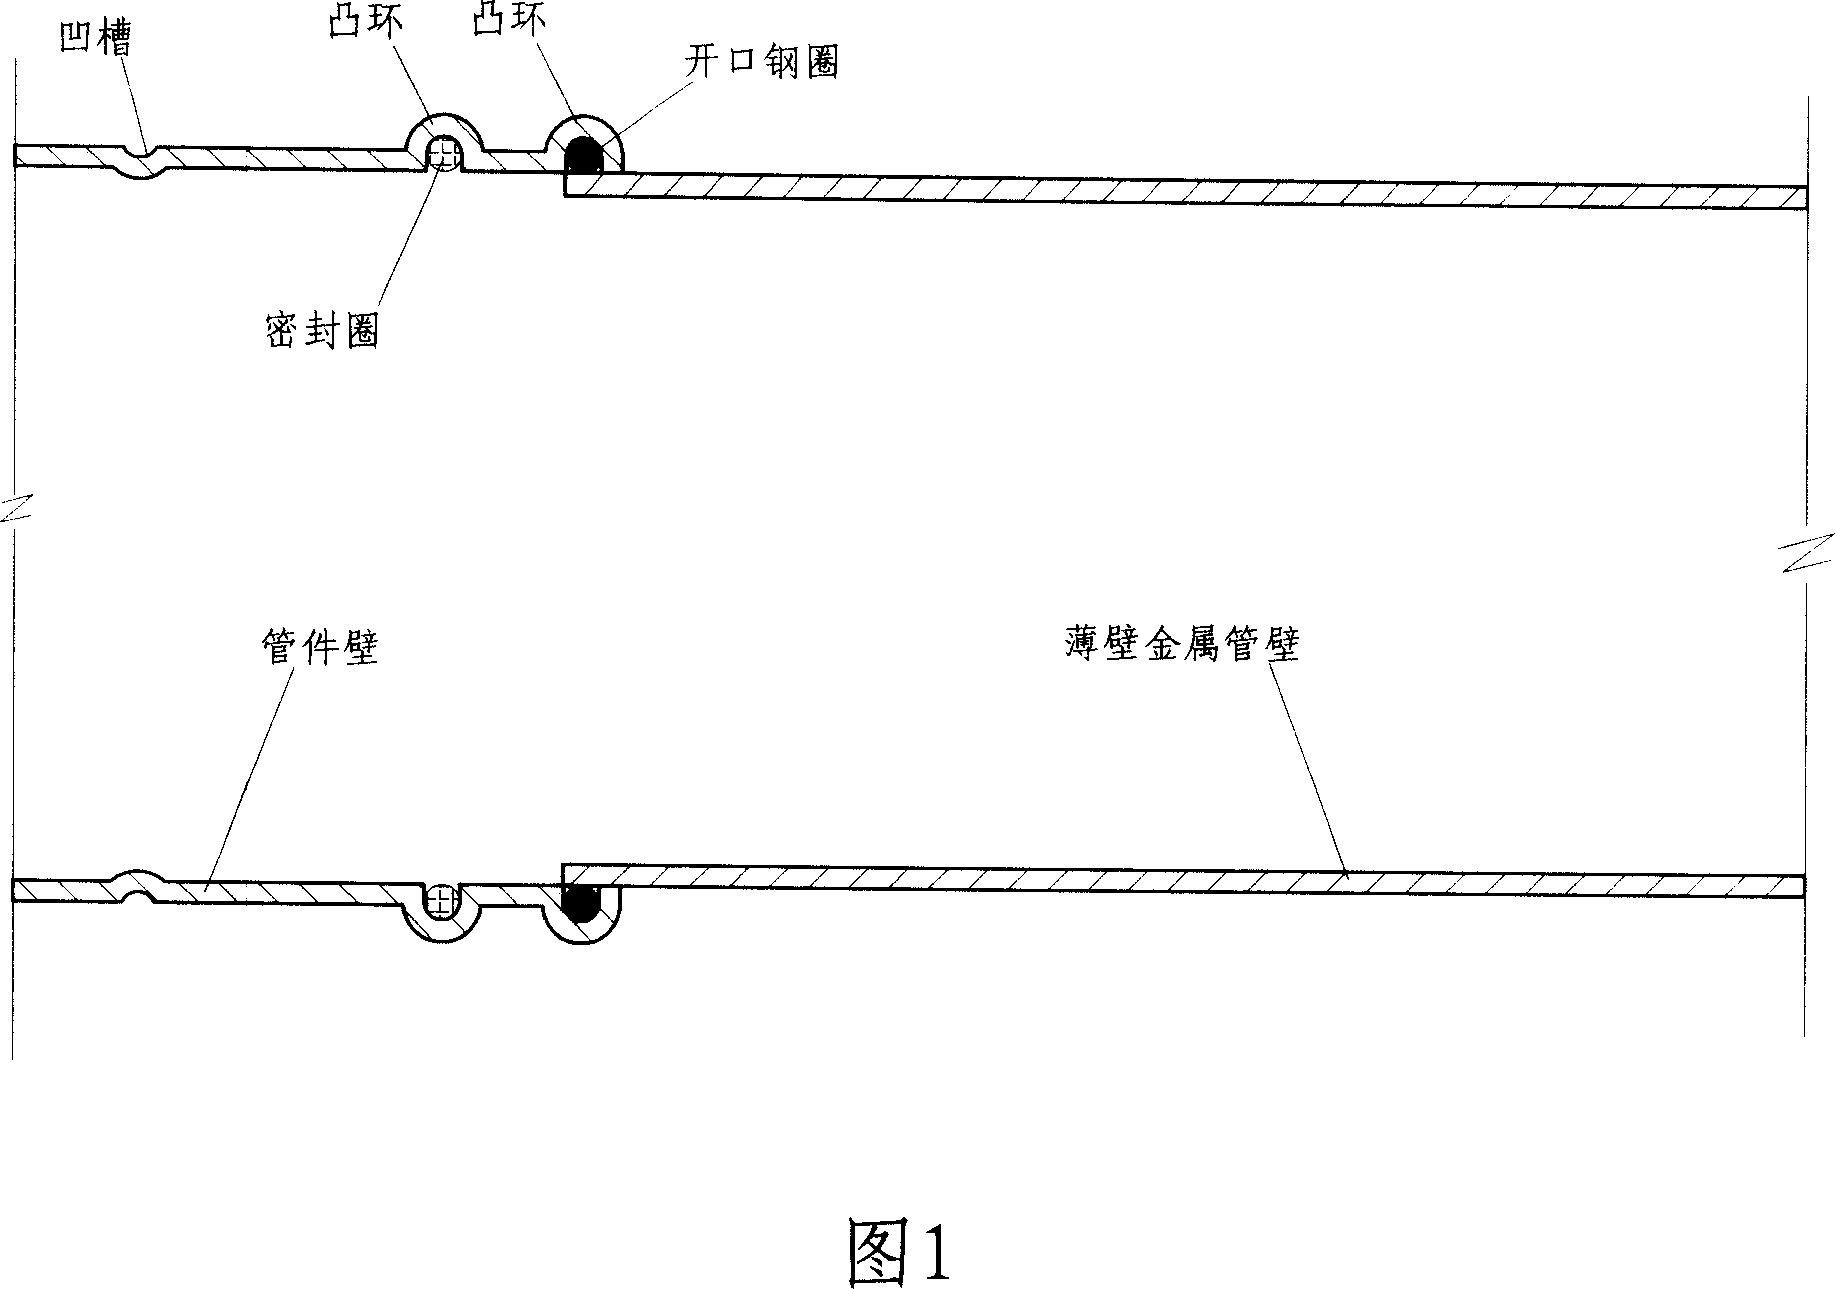 Clasp pipe fitting for connecting thin-wall metal pipe